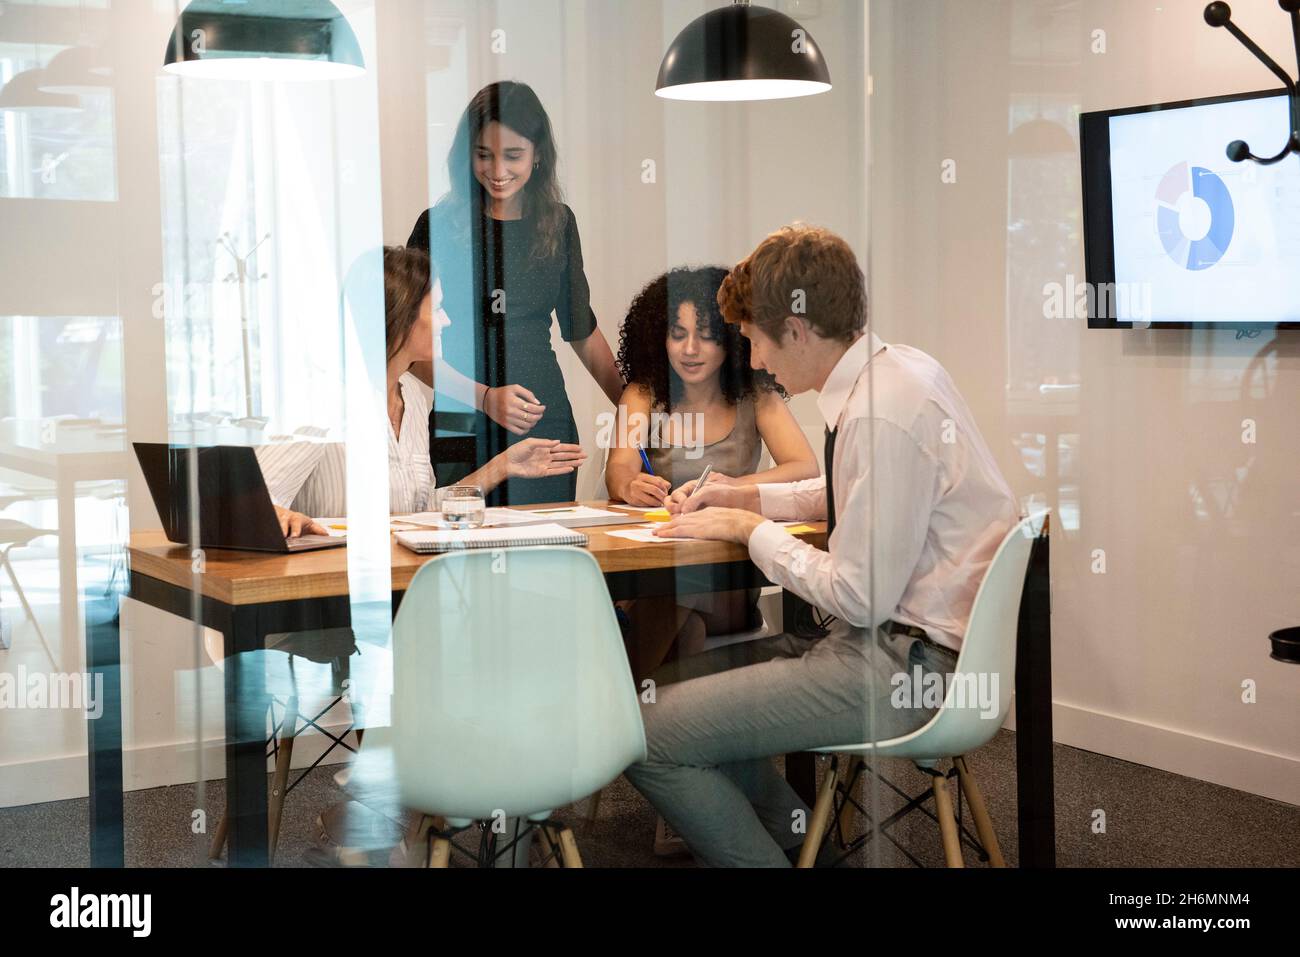 Business people working together in board room Stock Photo